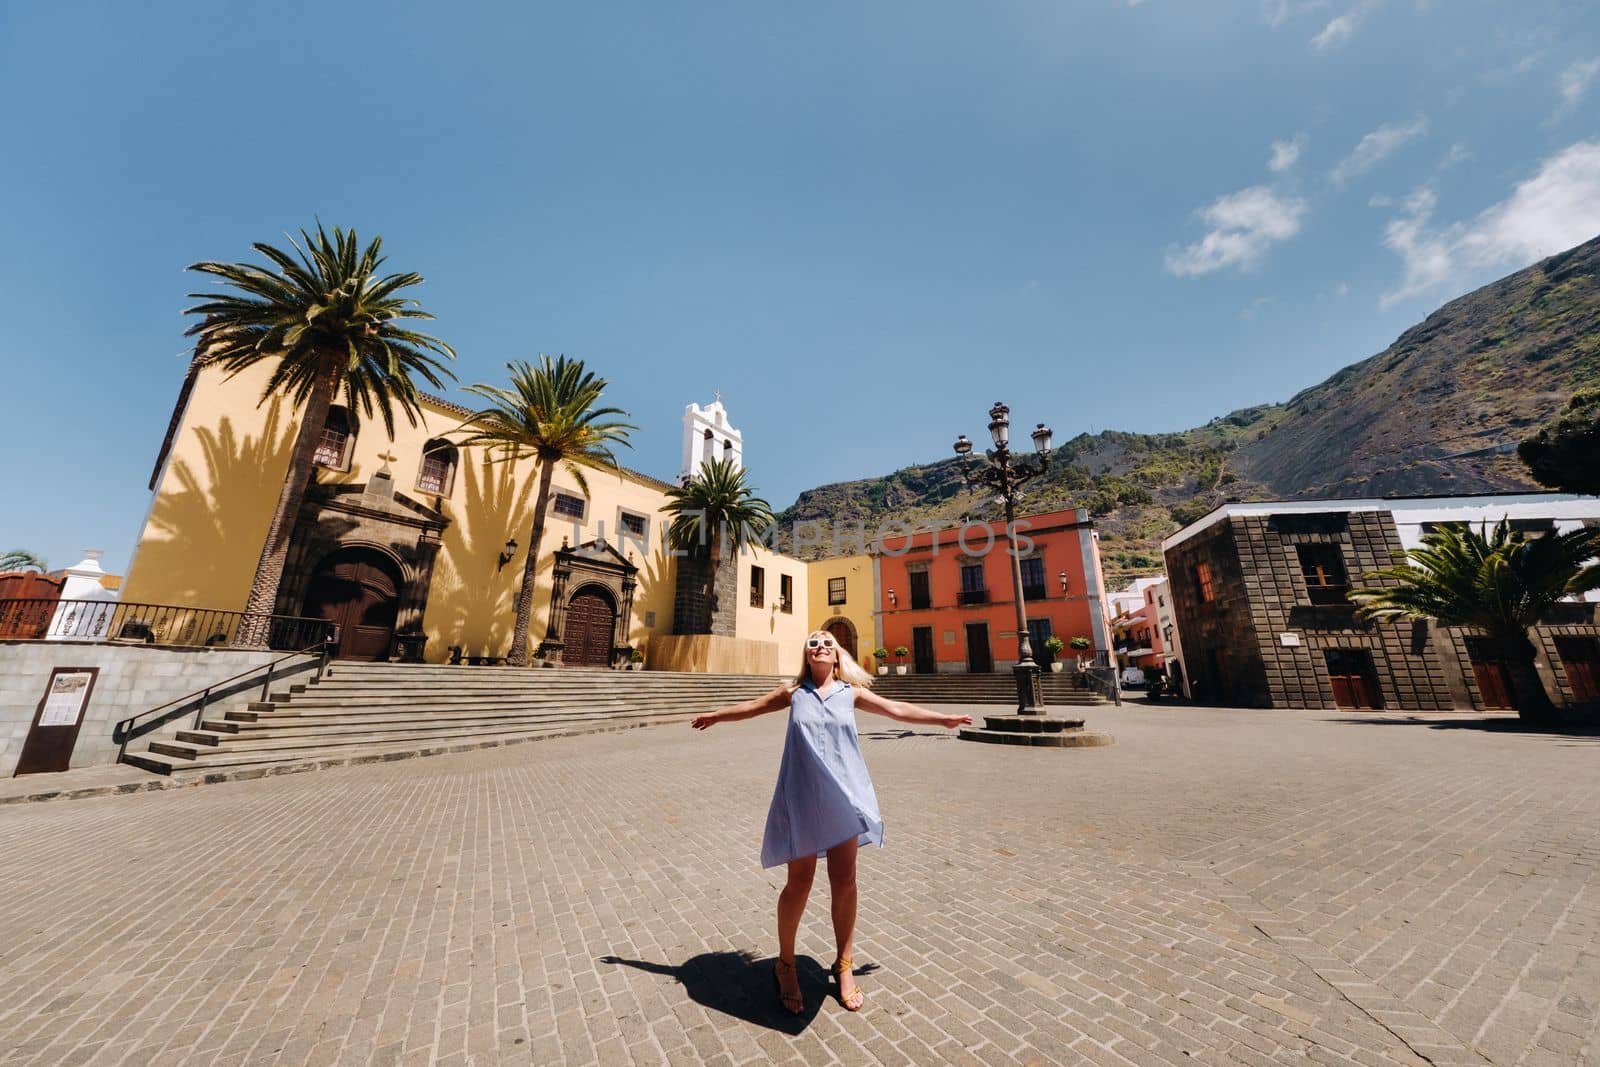 A girl in a blue dress walks through the Old Town of Garachico on the island of Tenerife on a sunny day. Spain.